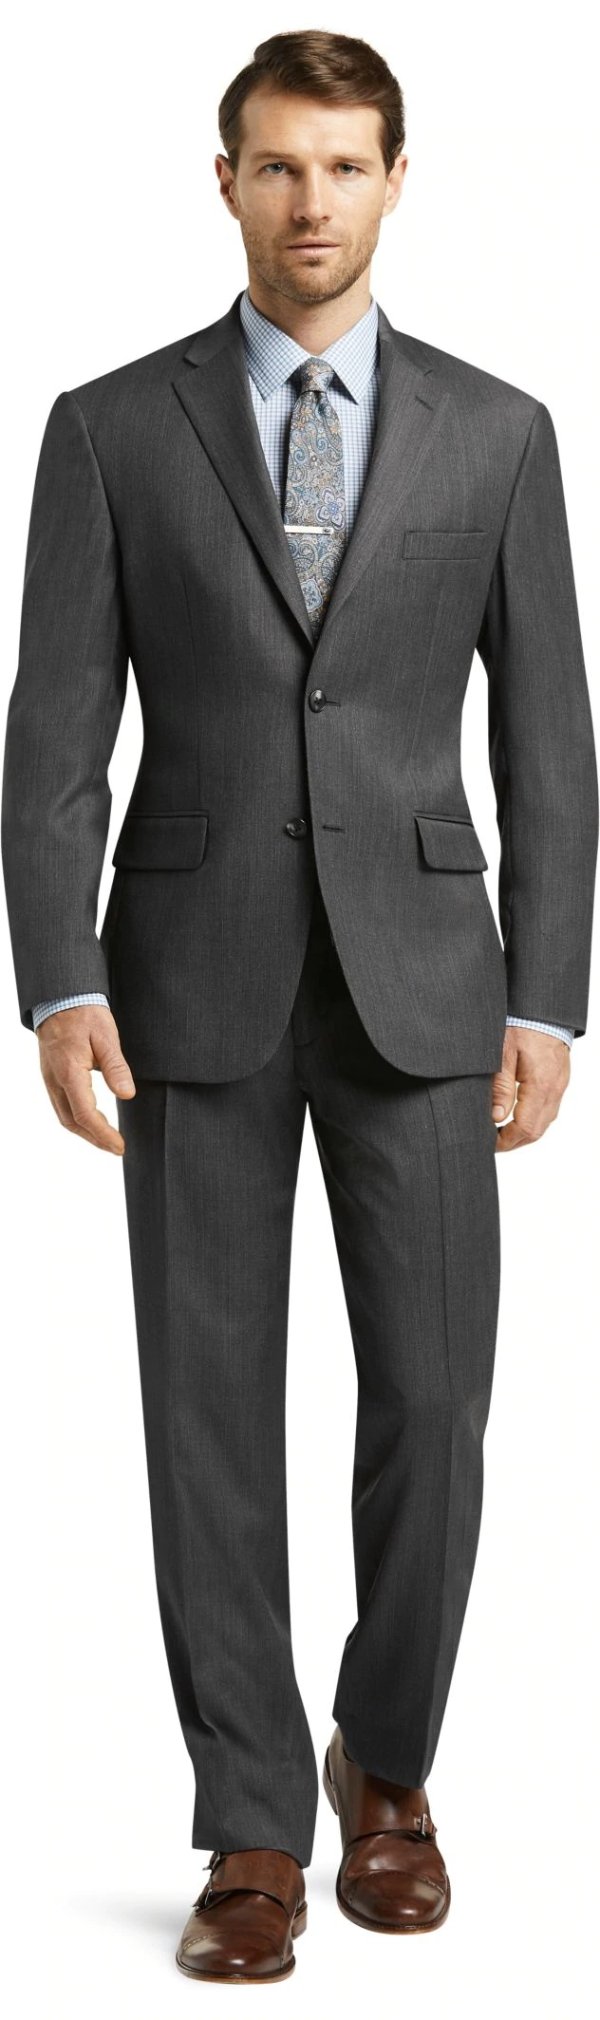 Traveler Collection Tailored Fit Micro Weave Suit CLEARANCE - All Clearance | Jos A Bank